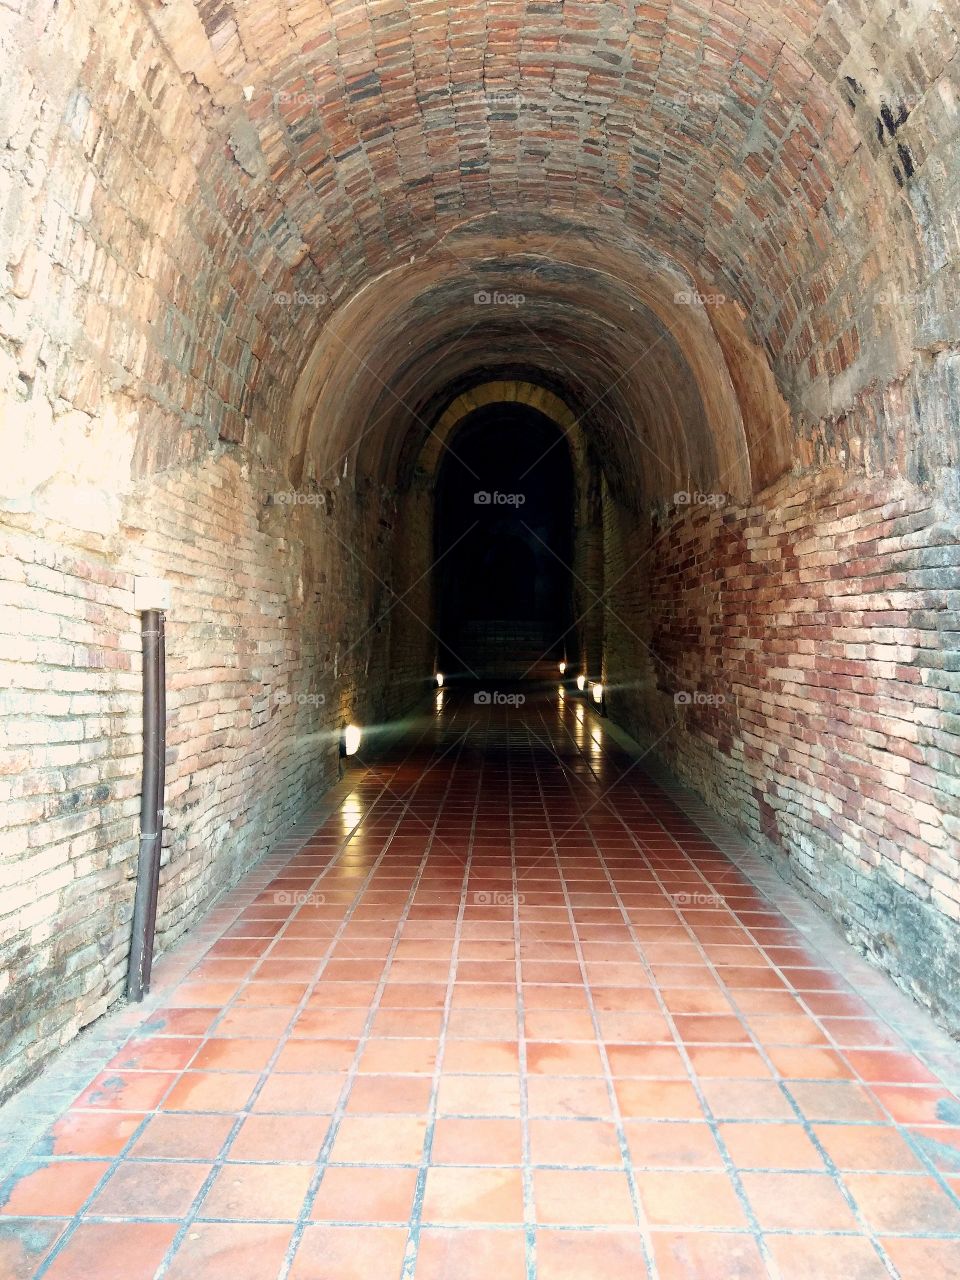 An ancient brick tunnel that was developed as a tourist attraction.